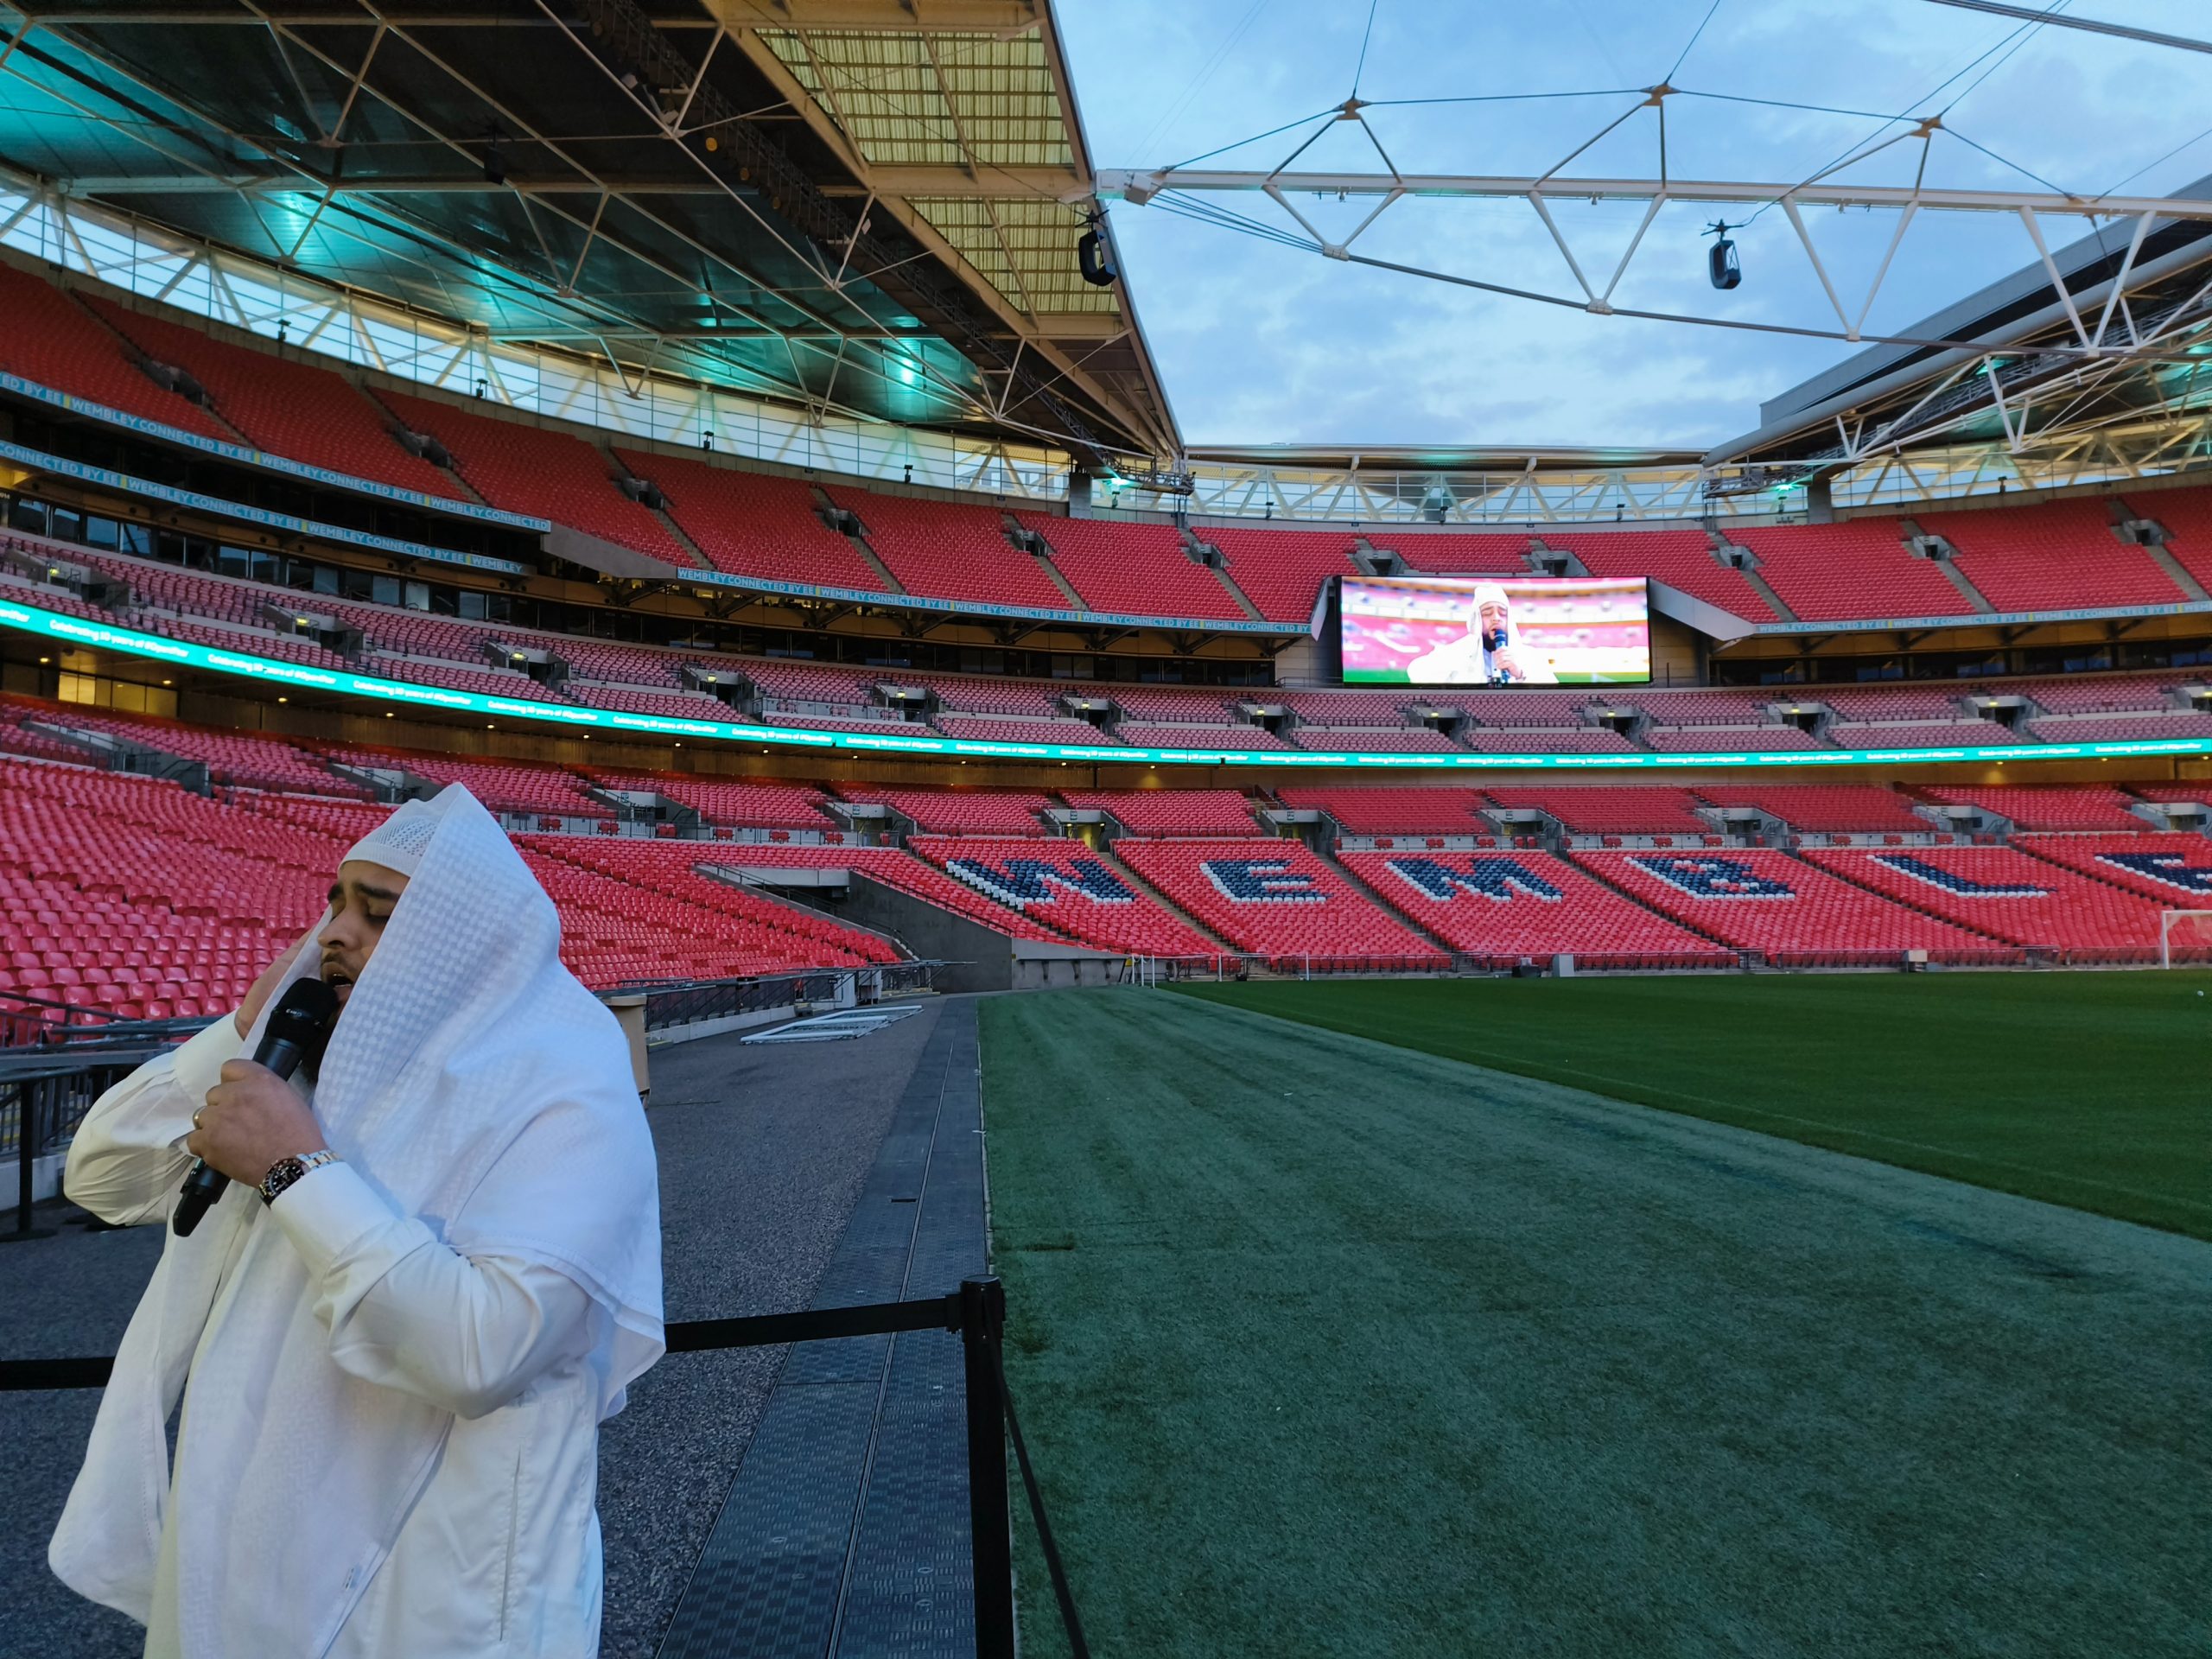 Hundreds Gather for Open Iftar at Wembley Stadium - About Islam